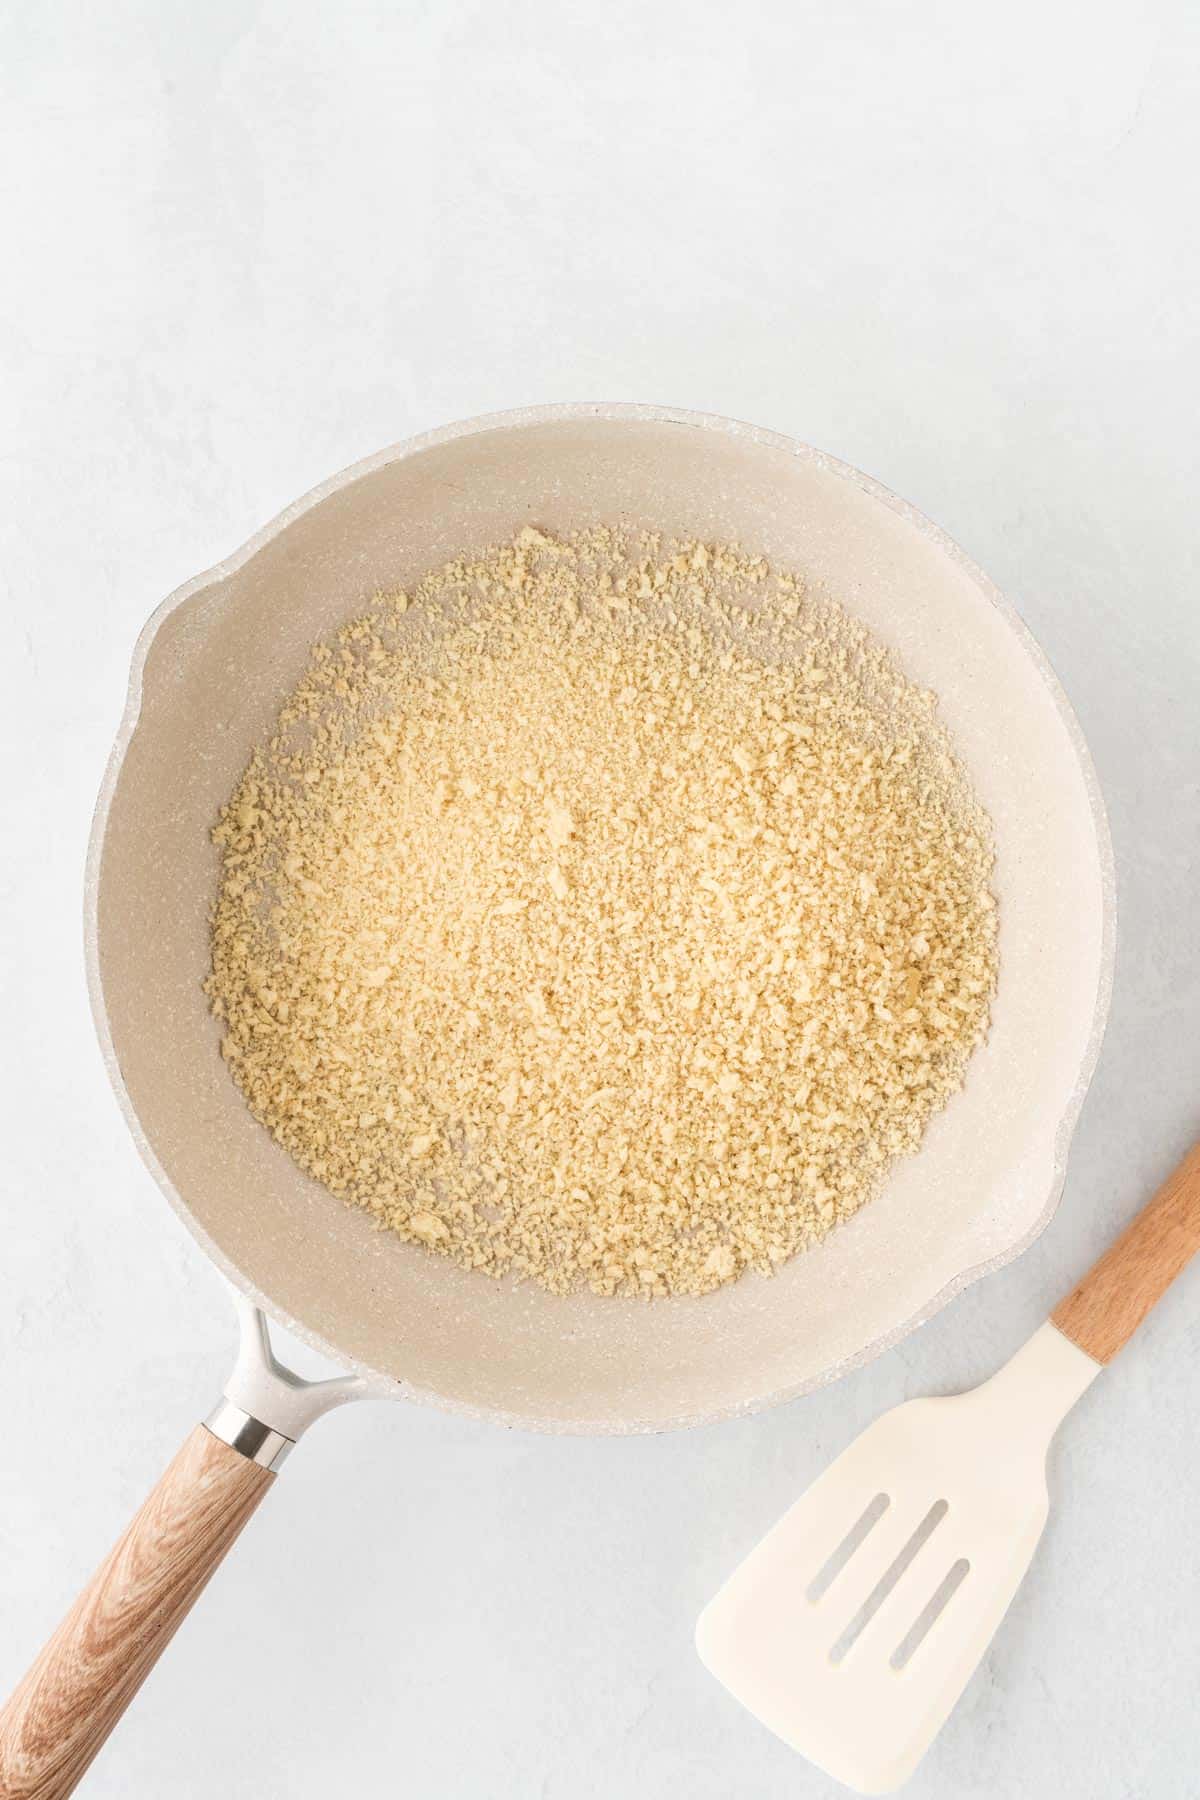 A photo of breadcrumbs in a white skillet.